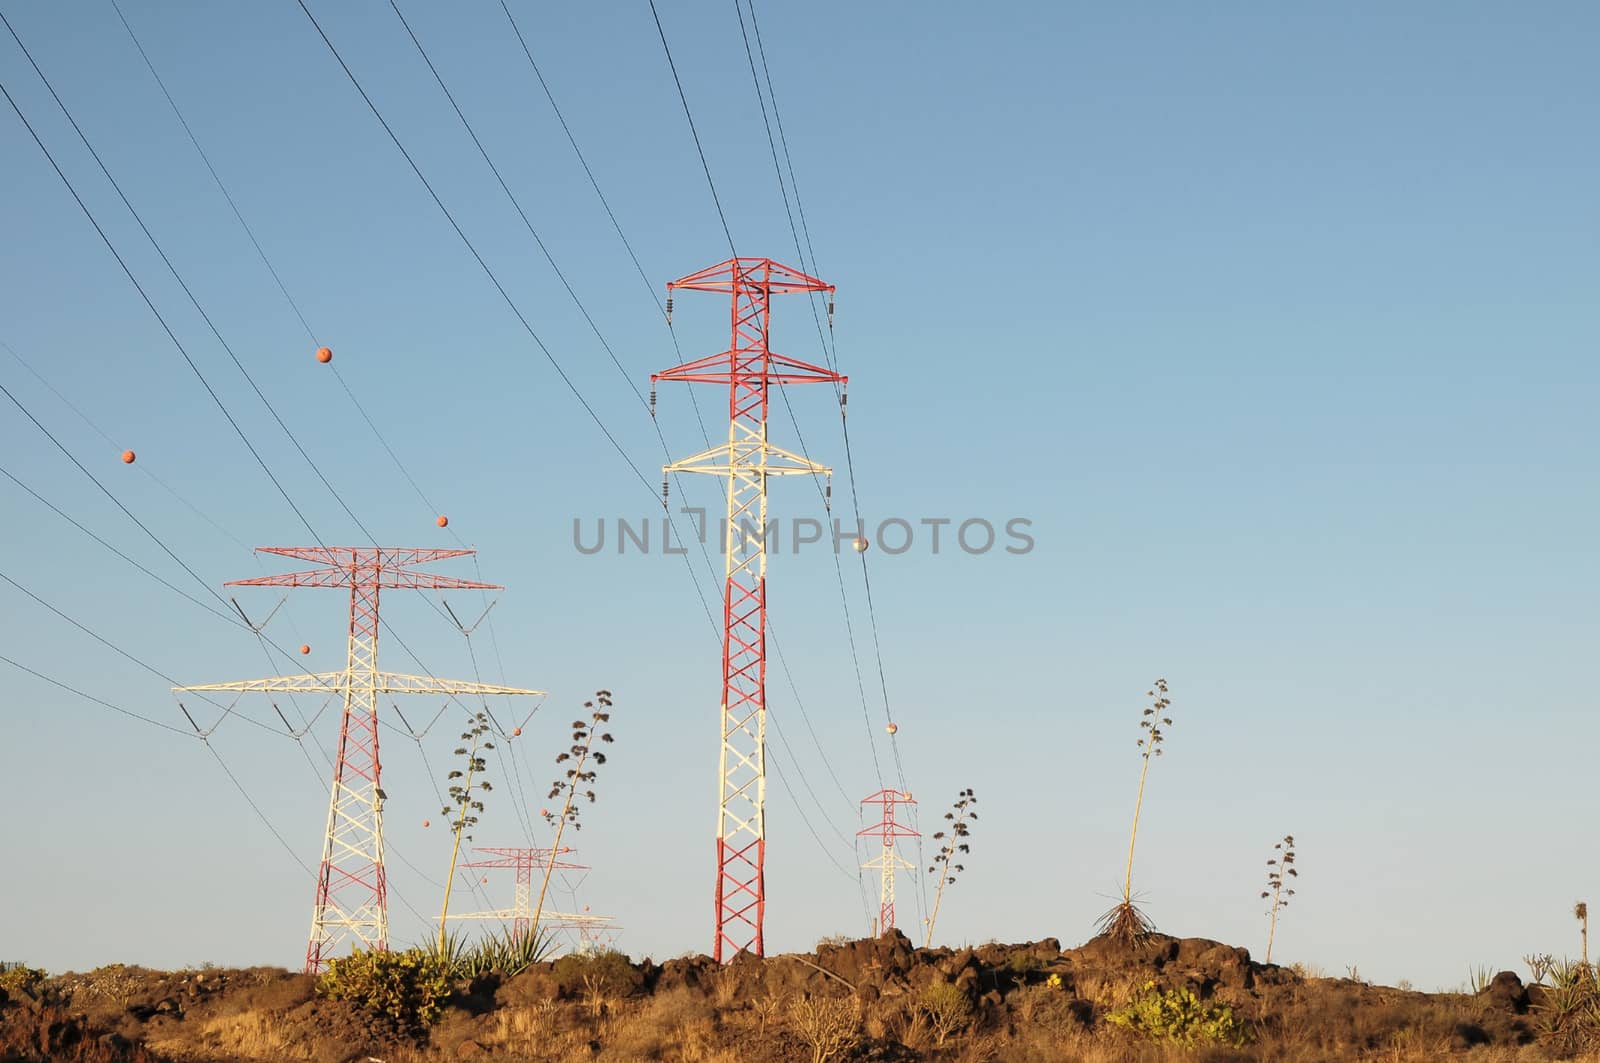 Electricity Pole over a Blue Sky in Spain